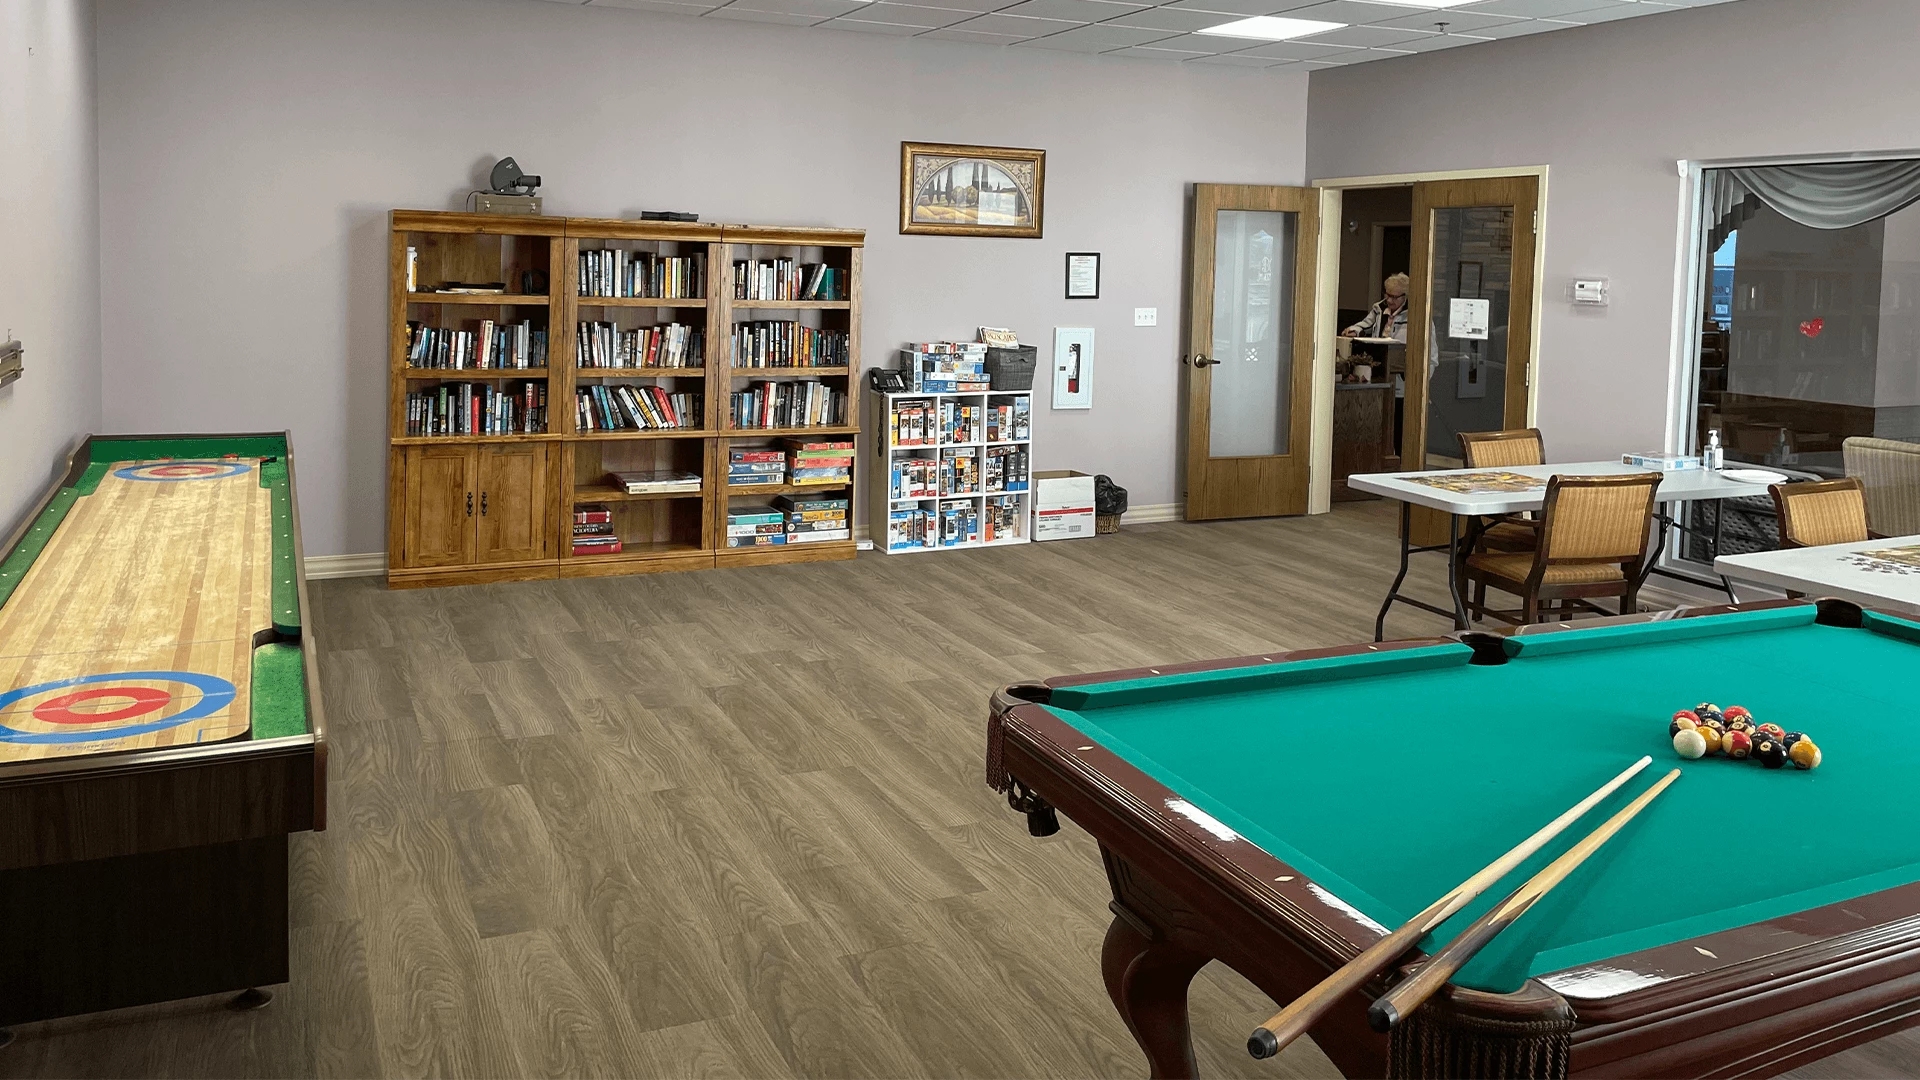 Games room at Cedarwood. There is a shelf with books, a shelf with games, shuffleboard, a pool table, and a table with puzzles on it.